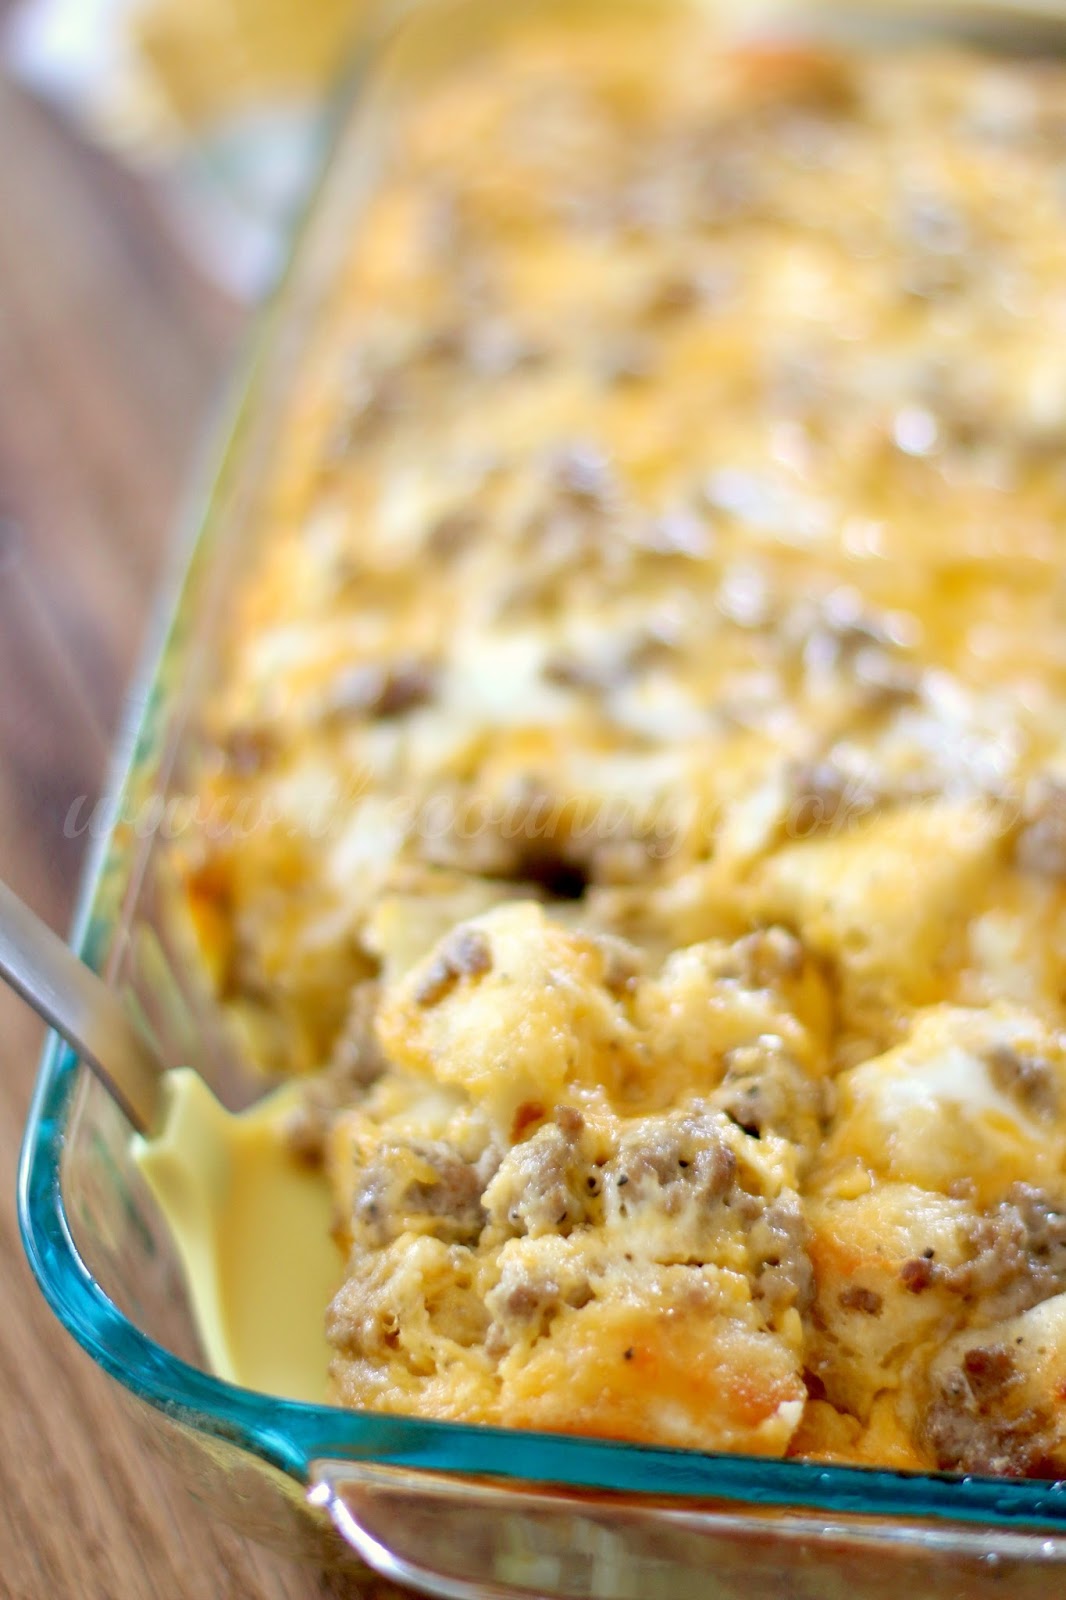 Sausage, Egg & Cheese Biscuit Casserole - The Country Cook